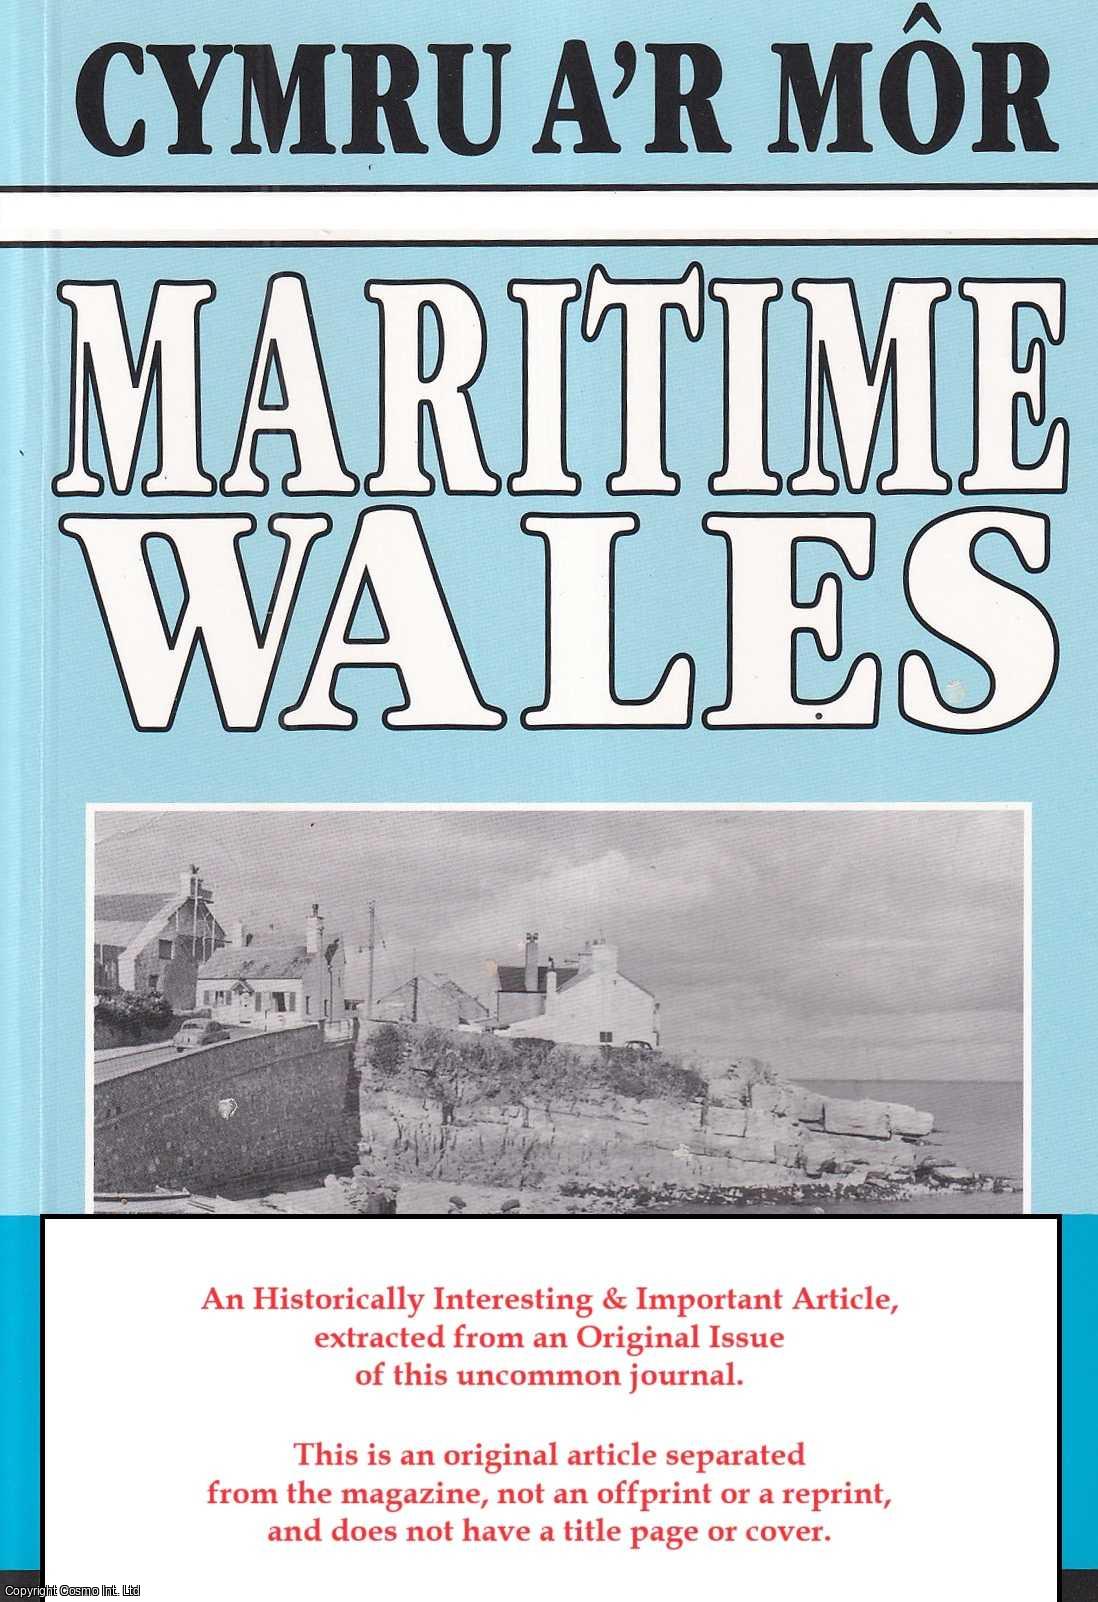 M. K. Stammers - Coal for The Cape. An original article from Maritime Wales, 2000.